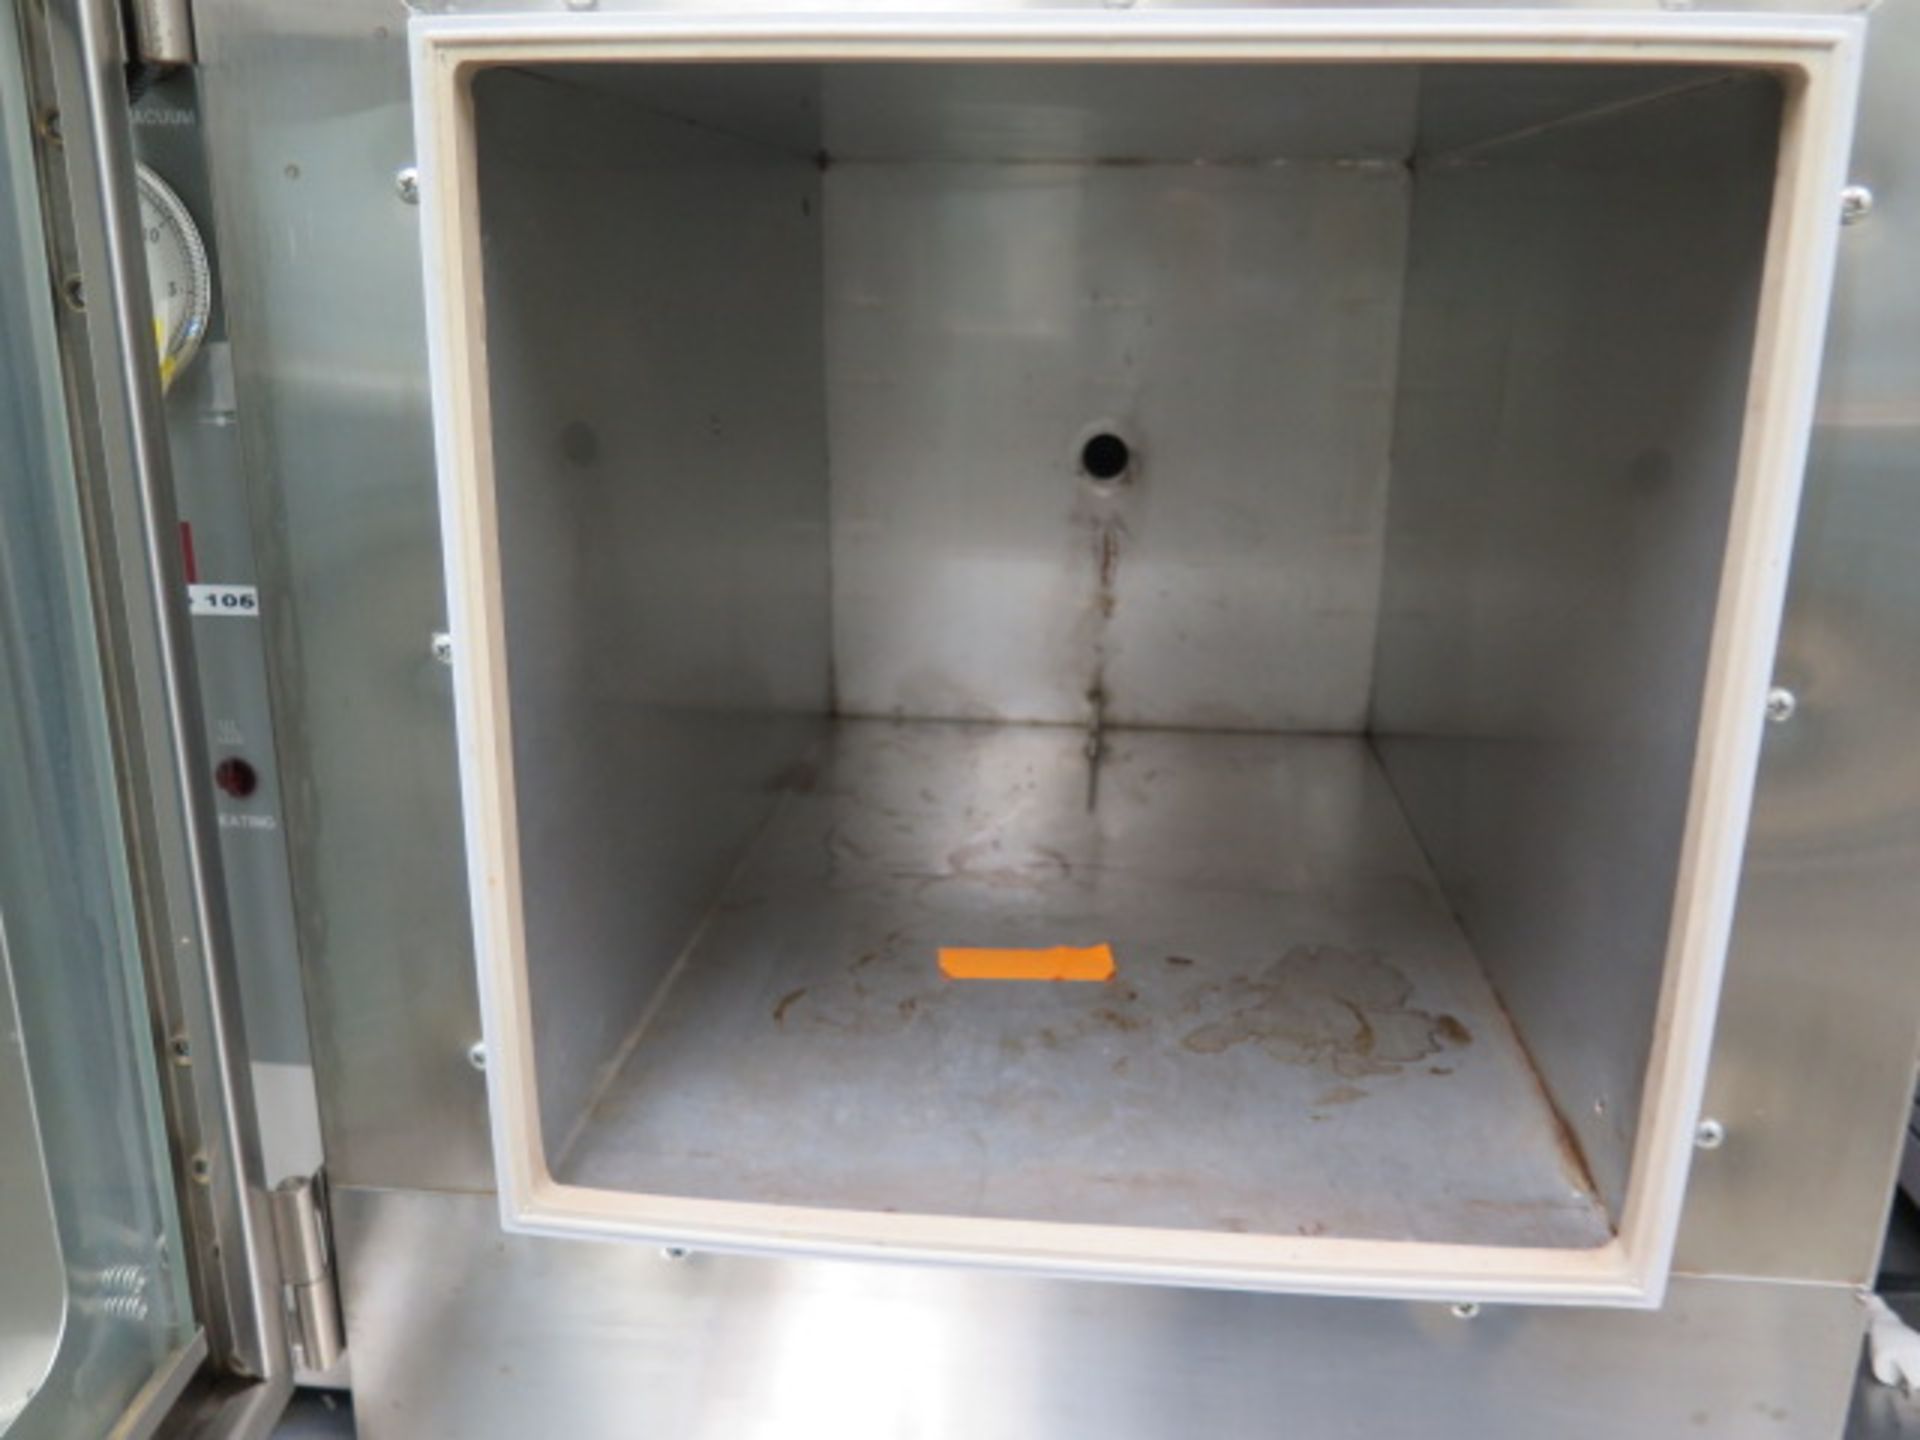 VWR mdl. 1430M Vacuum Oven s/n 1201098 60-105 Degrees C (SOLD AS-IS - NO WARRANTY) - Image 7 of 10